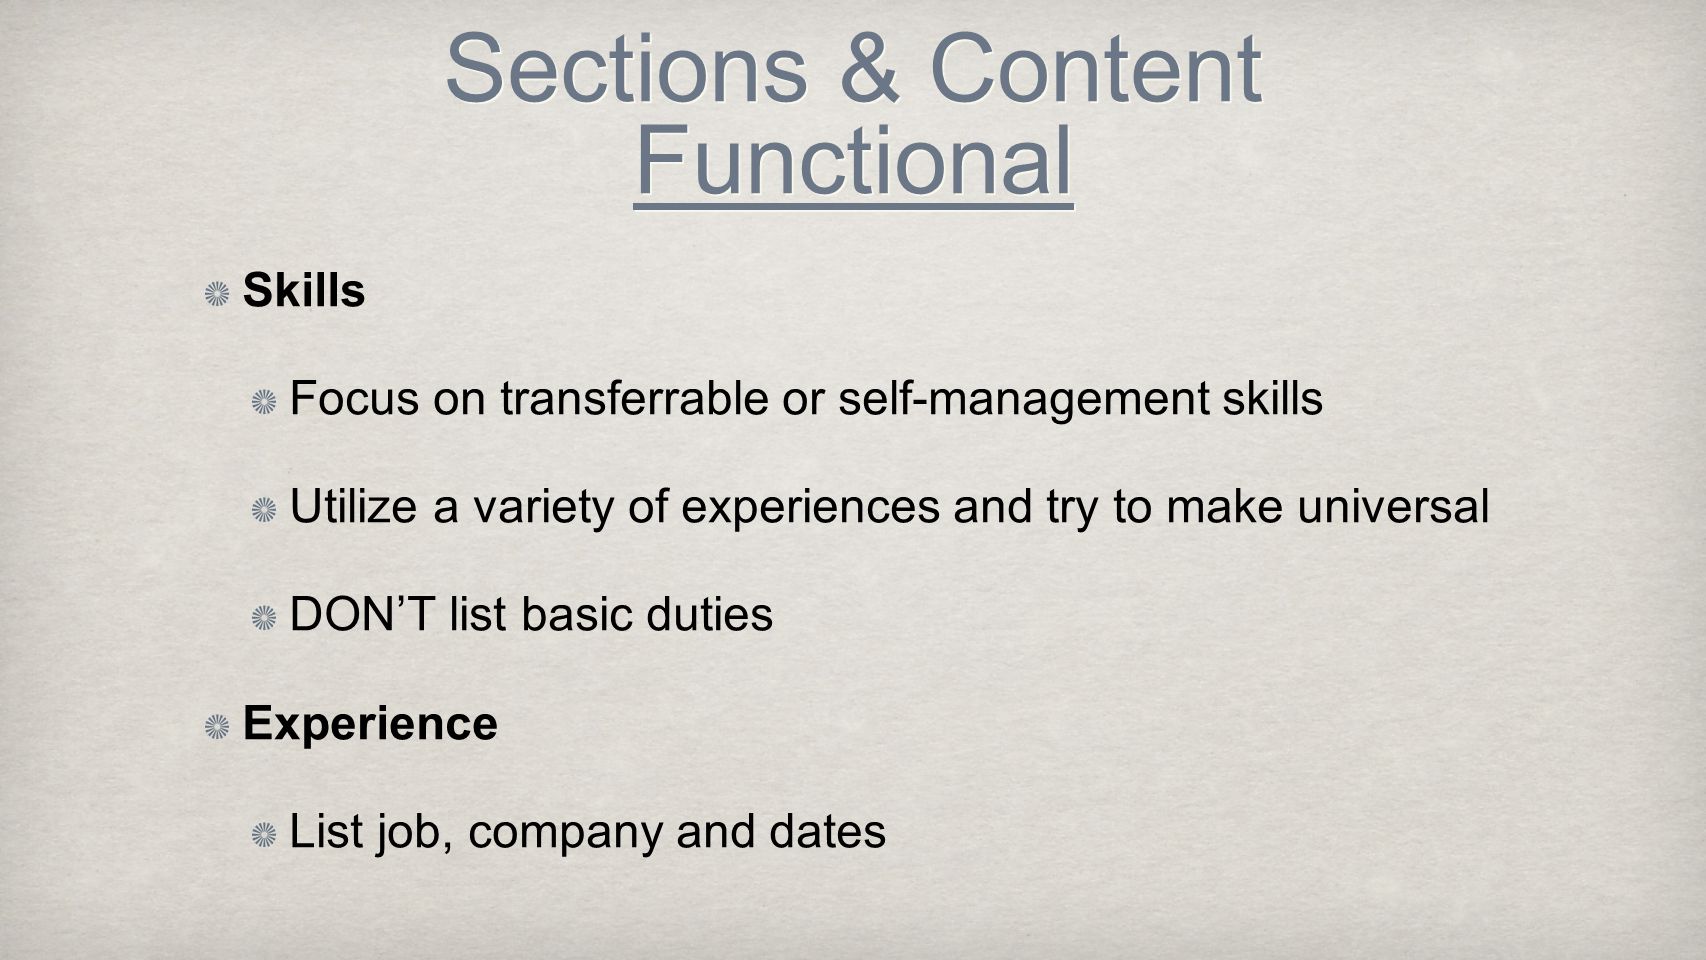 Sections & Content Functional Skills Focus on transferrable or self-management skills Utilize a variety of experiences and try to make universal DON’T list basic duties Experience List job, company and dates